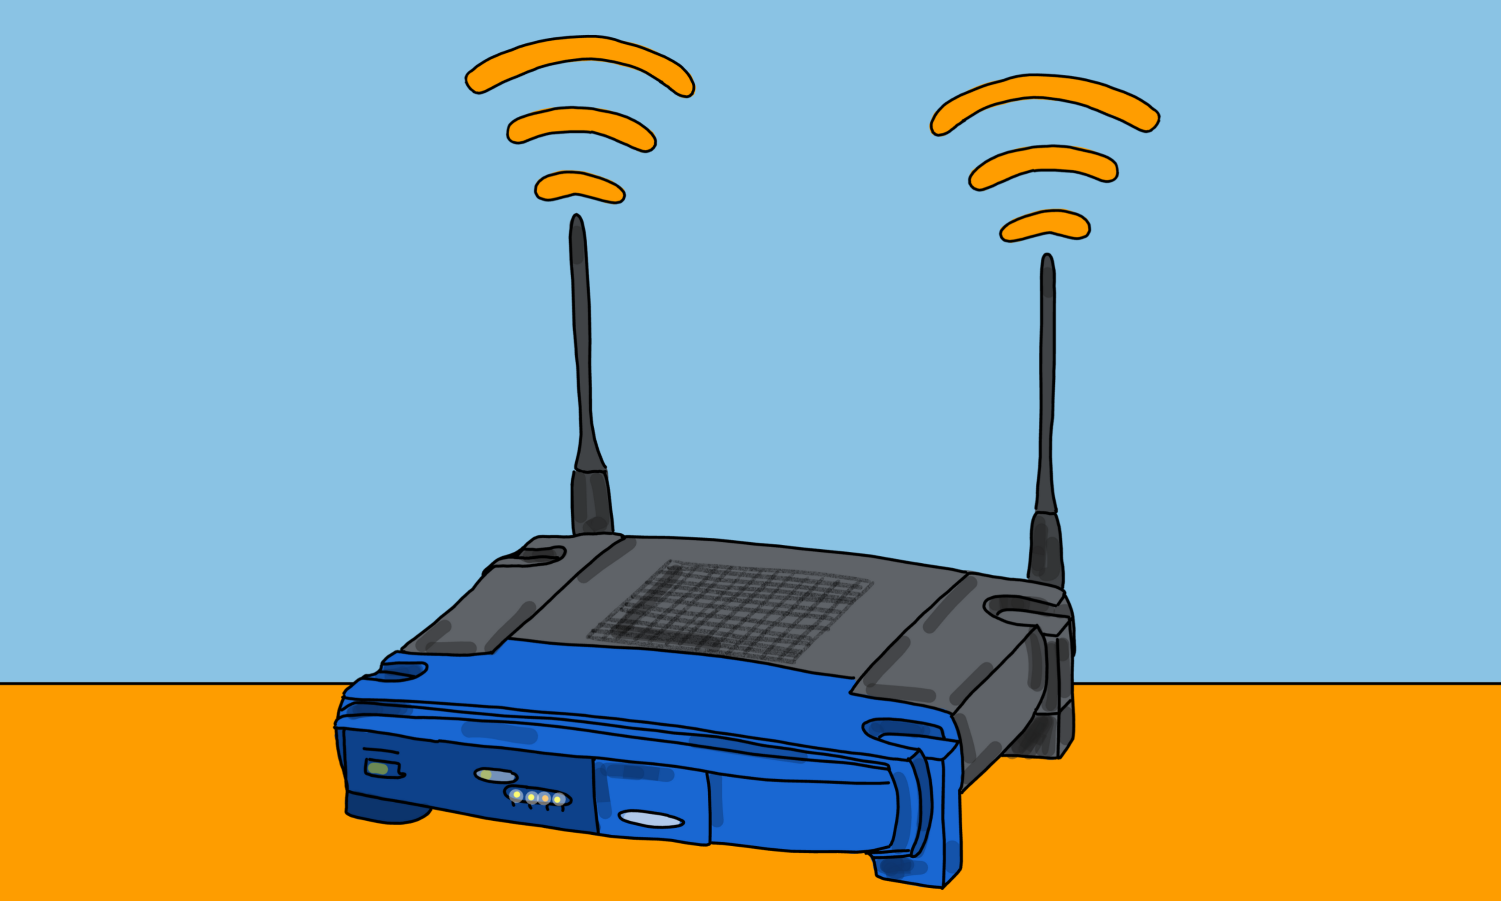 Illustration+of+Wi-Fi+router+emits+signal.